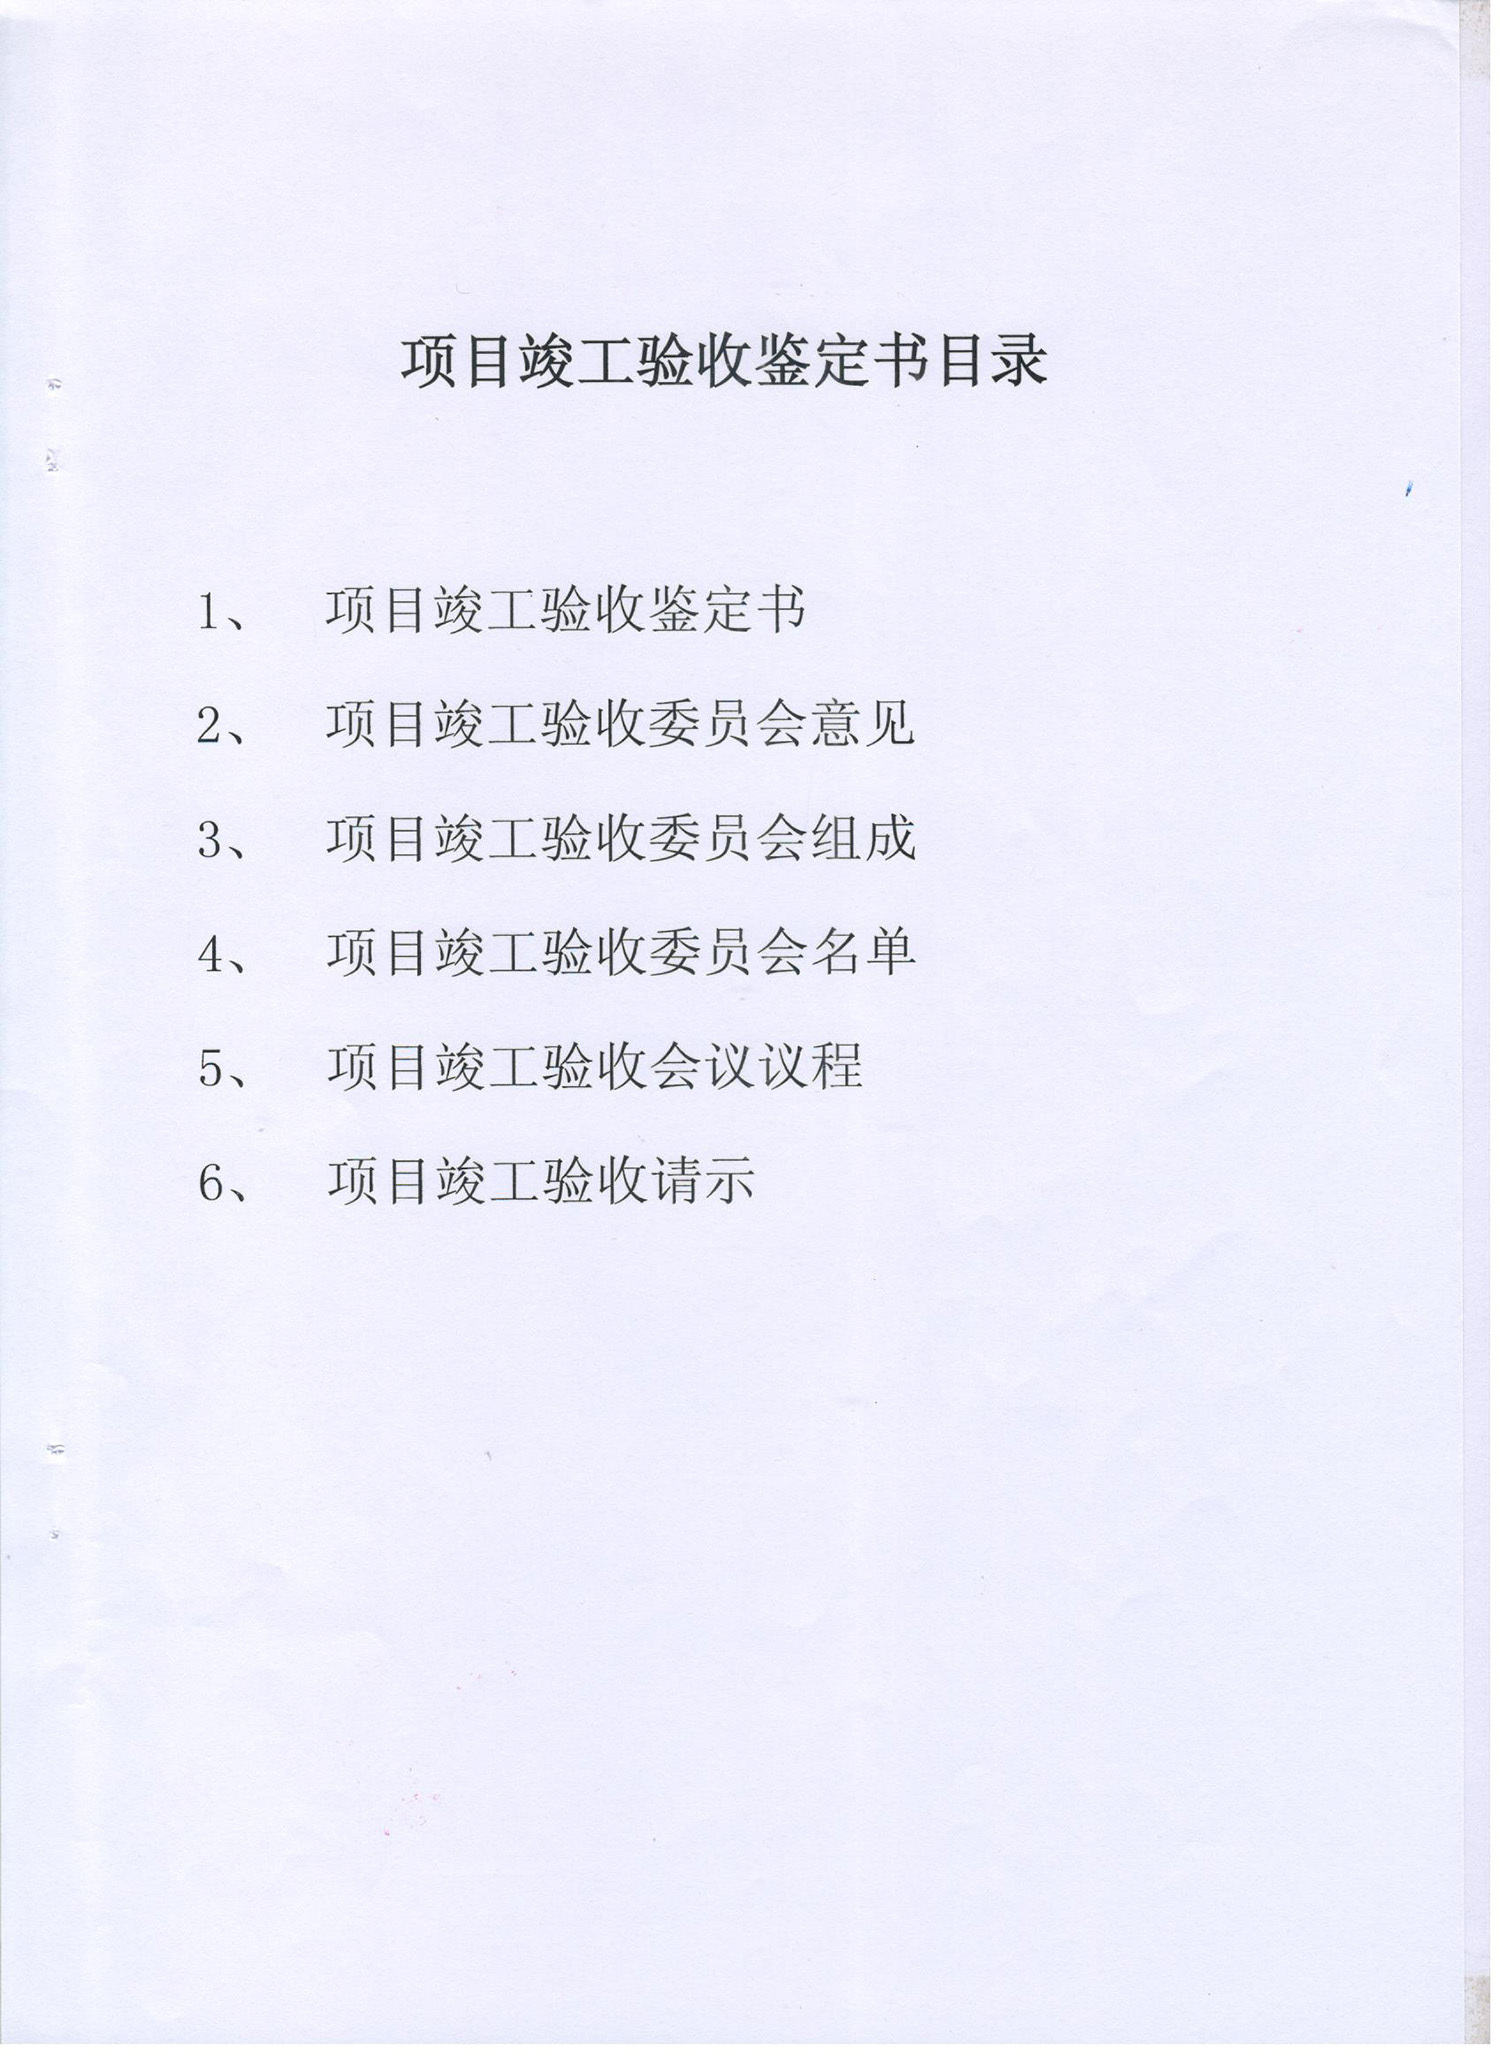 Acceptance Certificate of completion of 800t refined cadmium project of YUNNAN CHIHONG Zn & Ge CO., LTD.